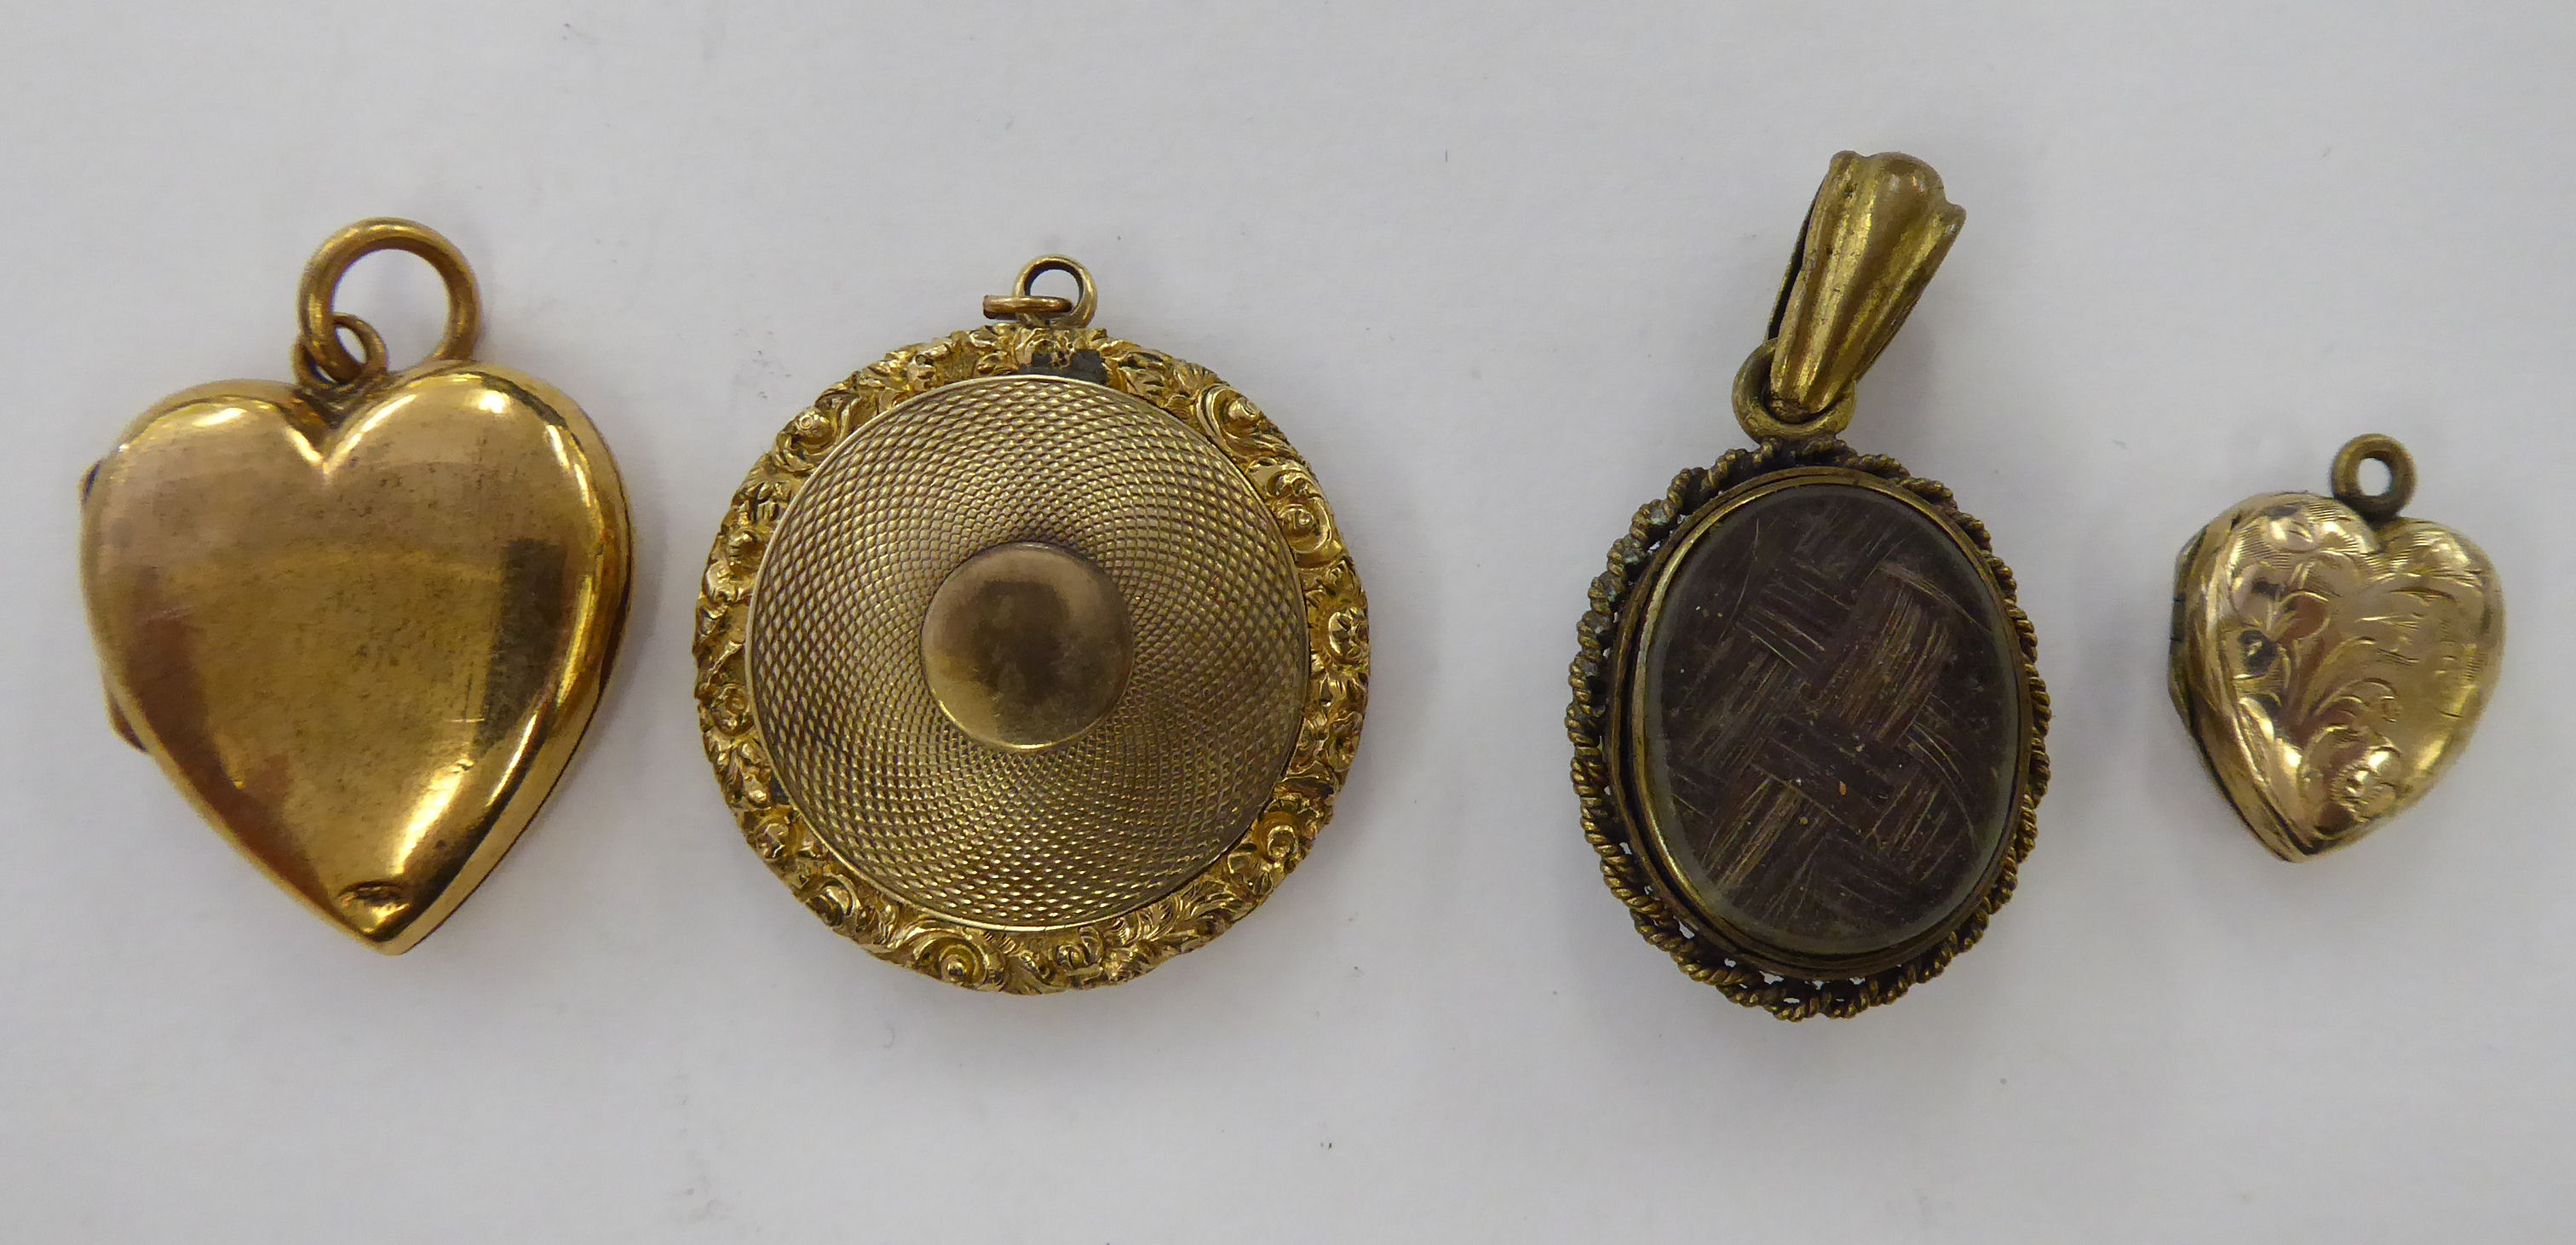 Four dissimilar 'antique' yellow metal lockets: to include one of heart design with floral engraved - Image 2 of 2